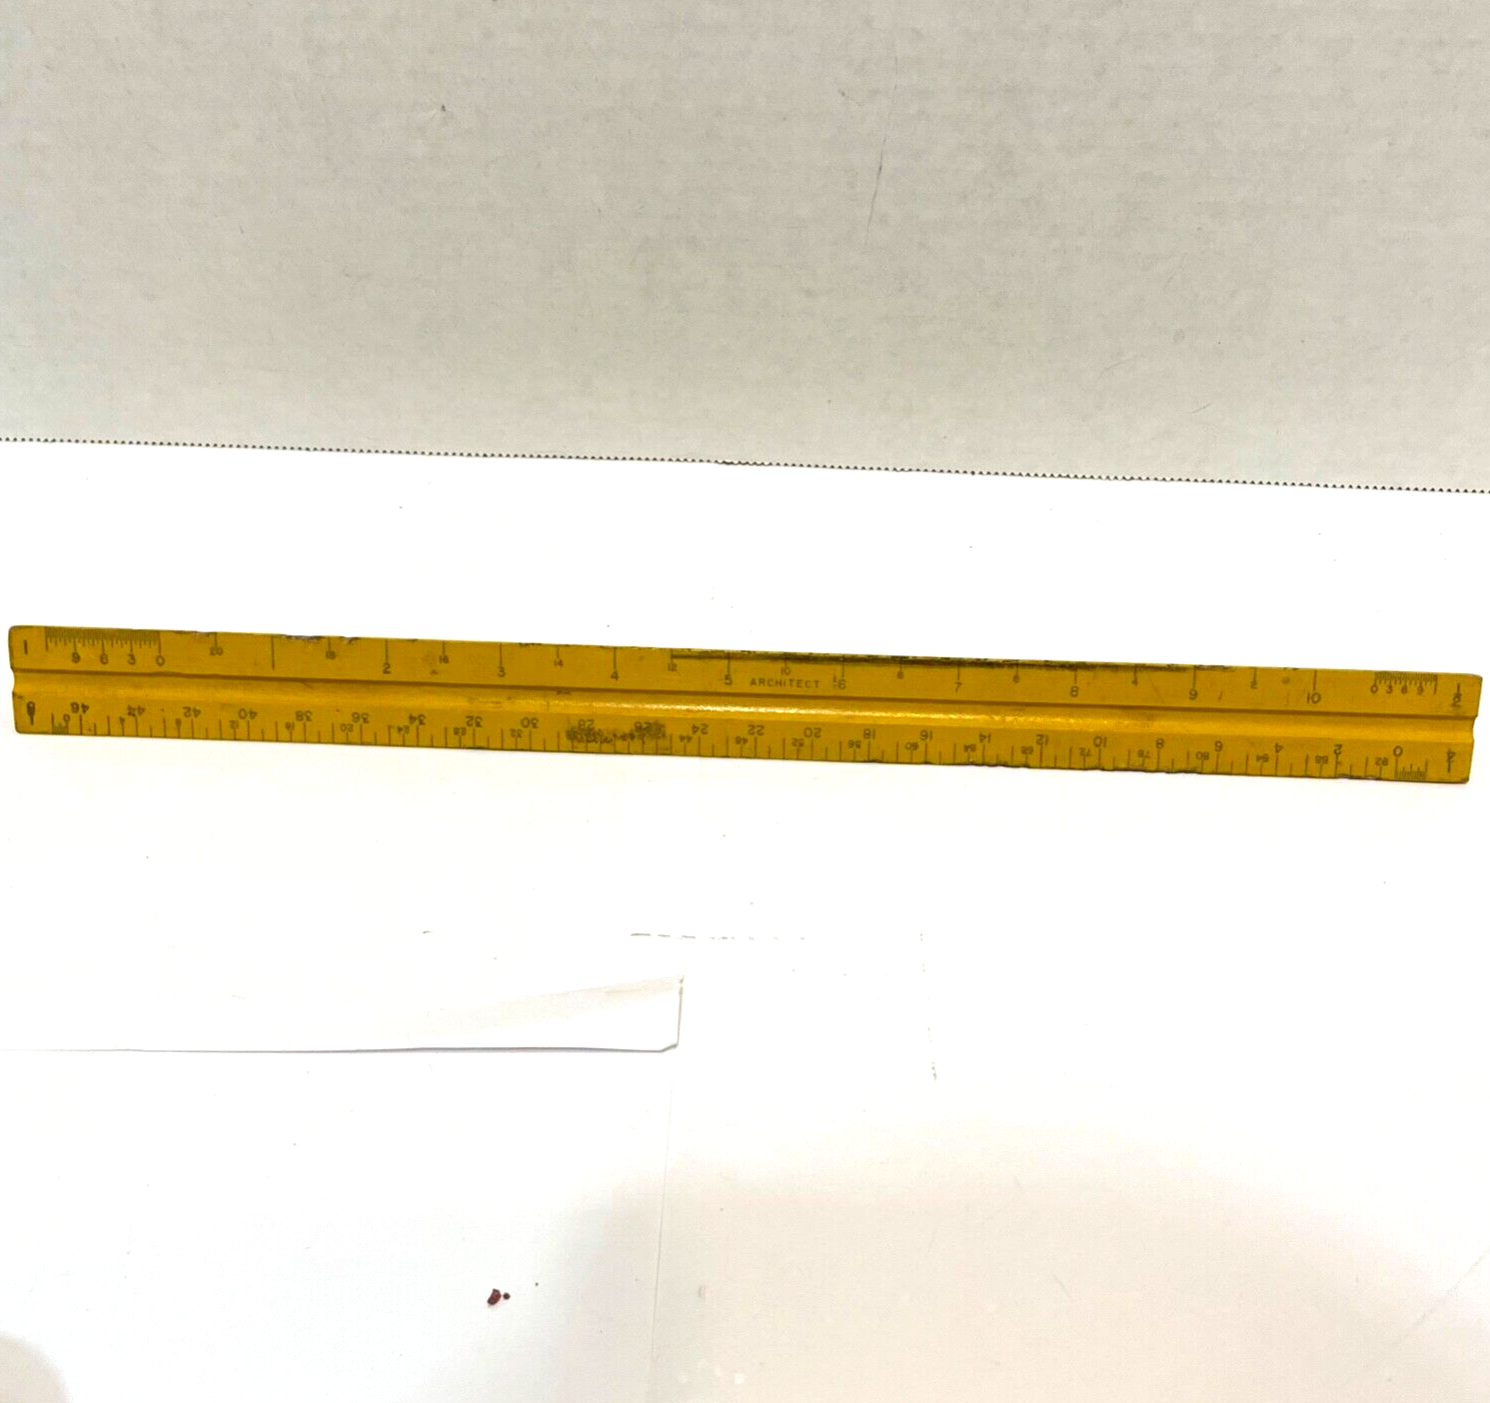 Primary image for Vintage Dietzgen Wooden 3 Sided Mechanical Engineer Architect Ruler 12" Yellow